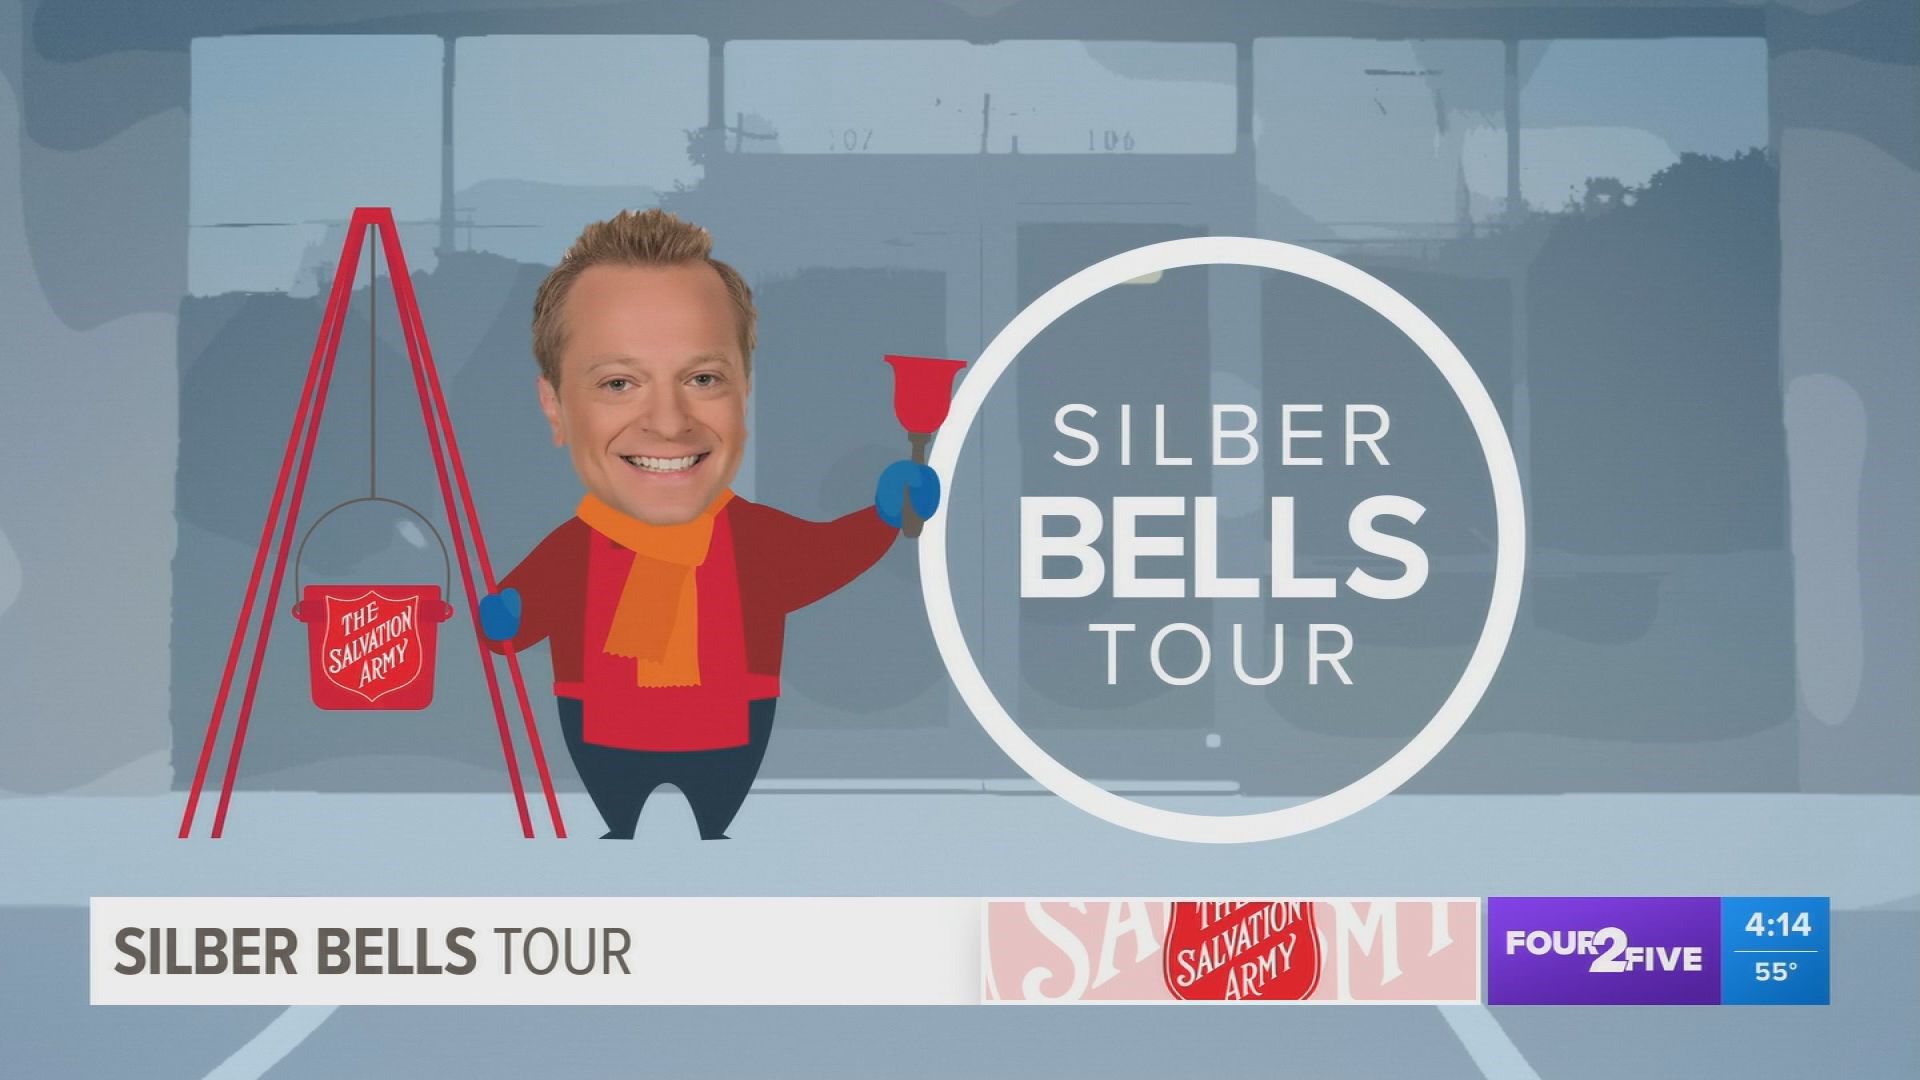 A group of special guests came out to support WFMY News 2's Chad Silber on his Silber Bells Tour today.